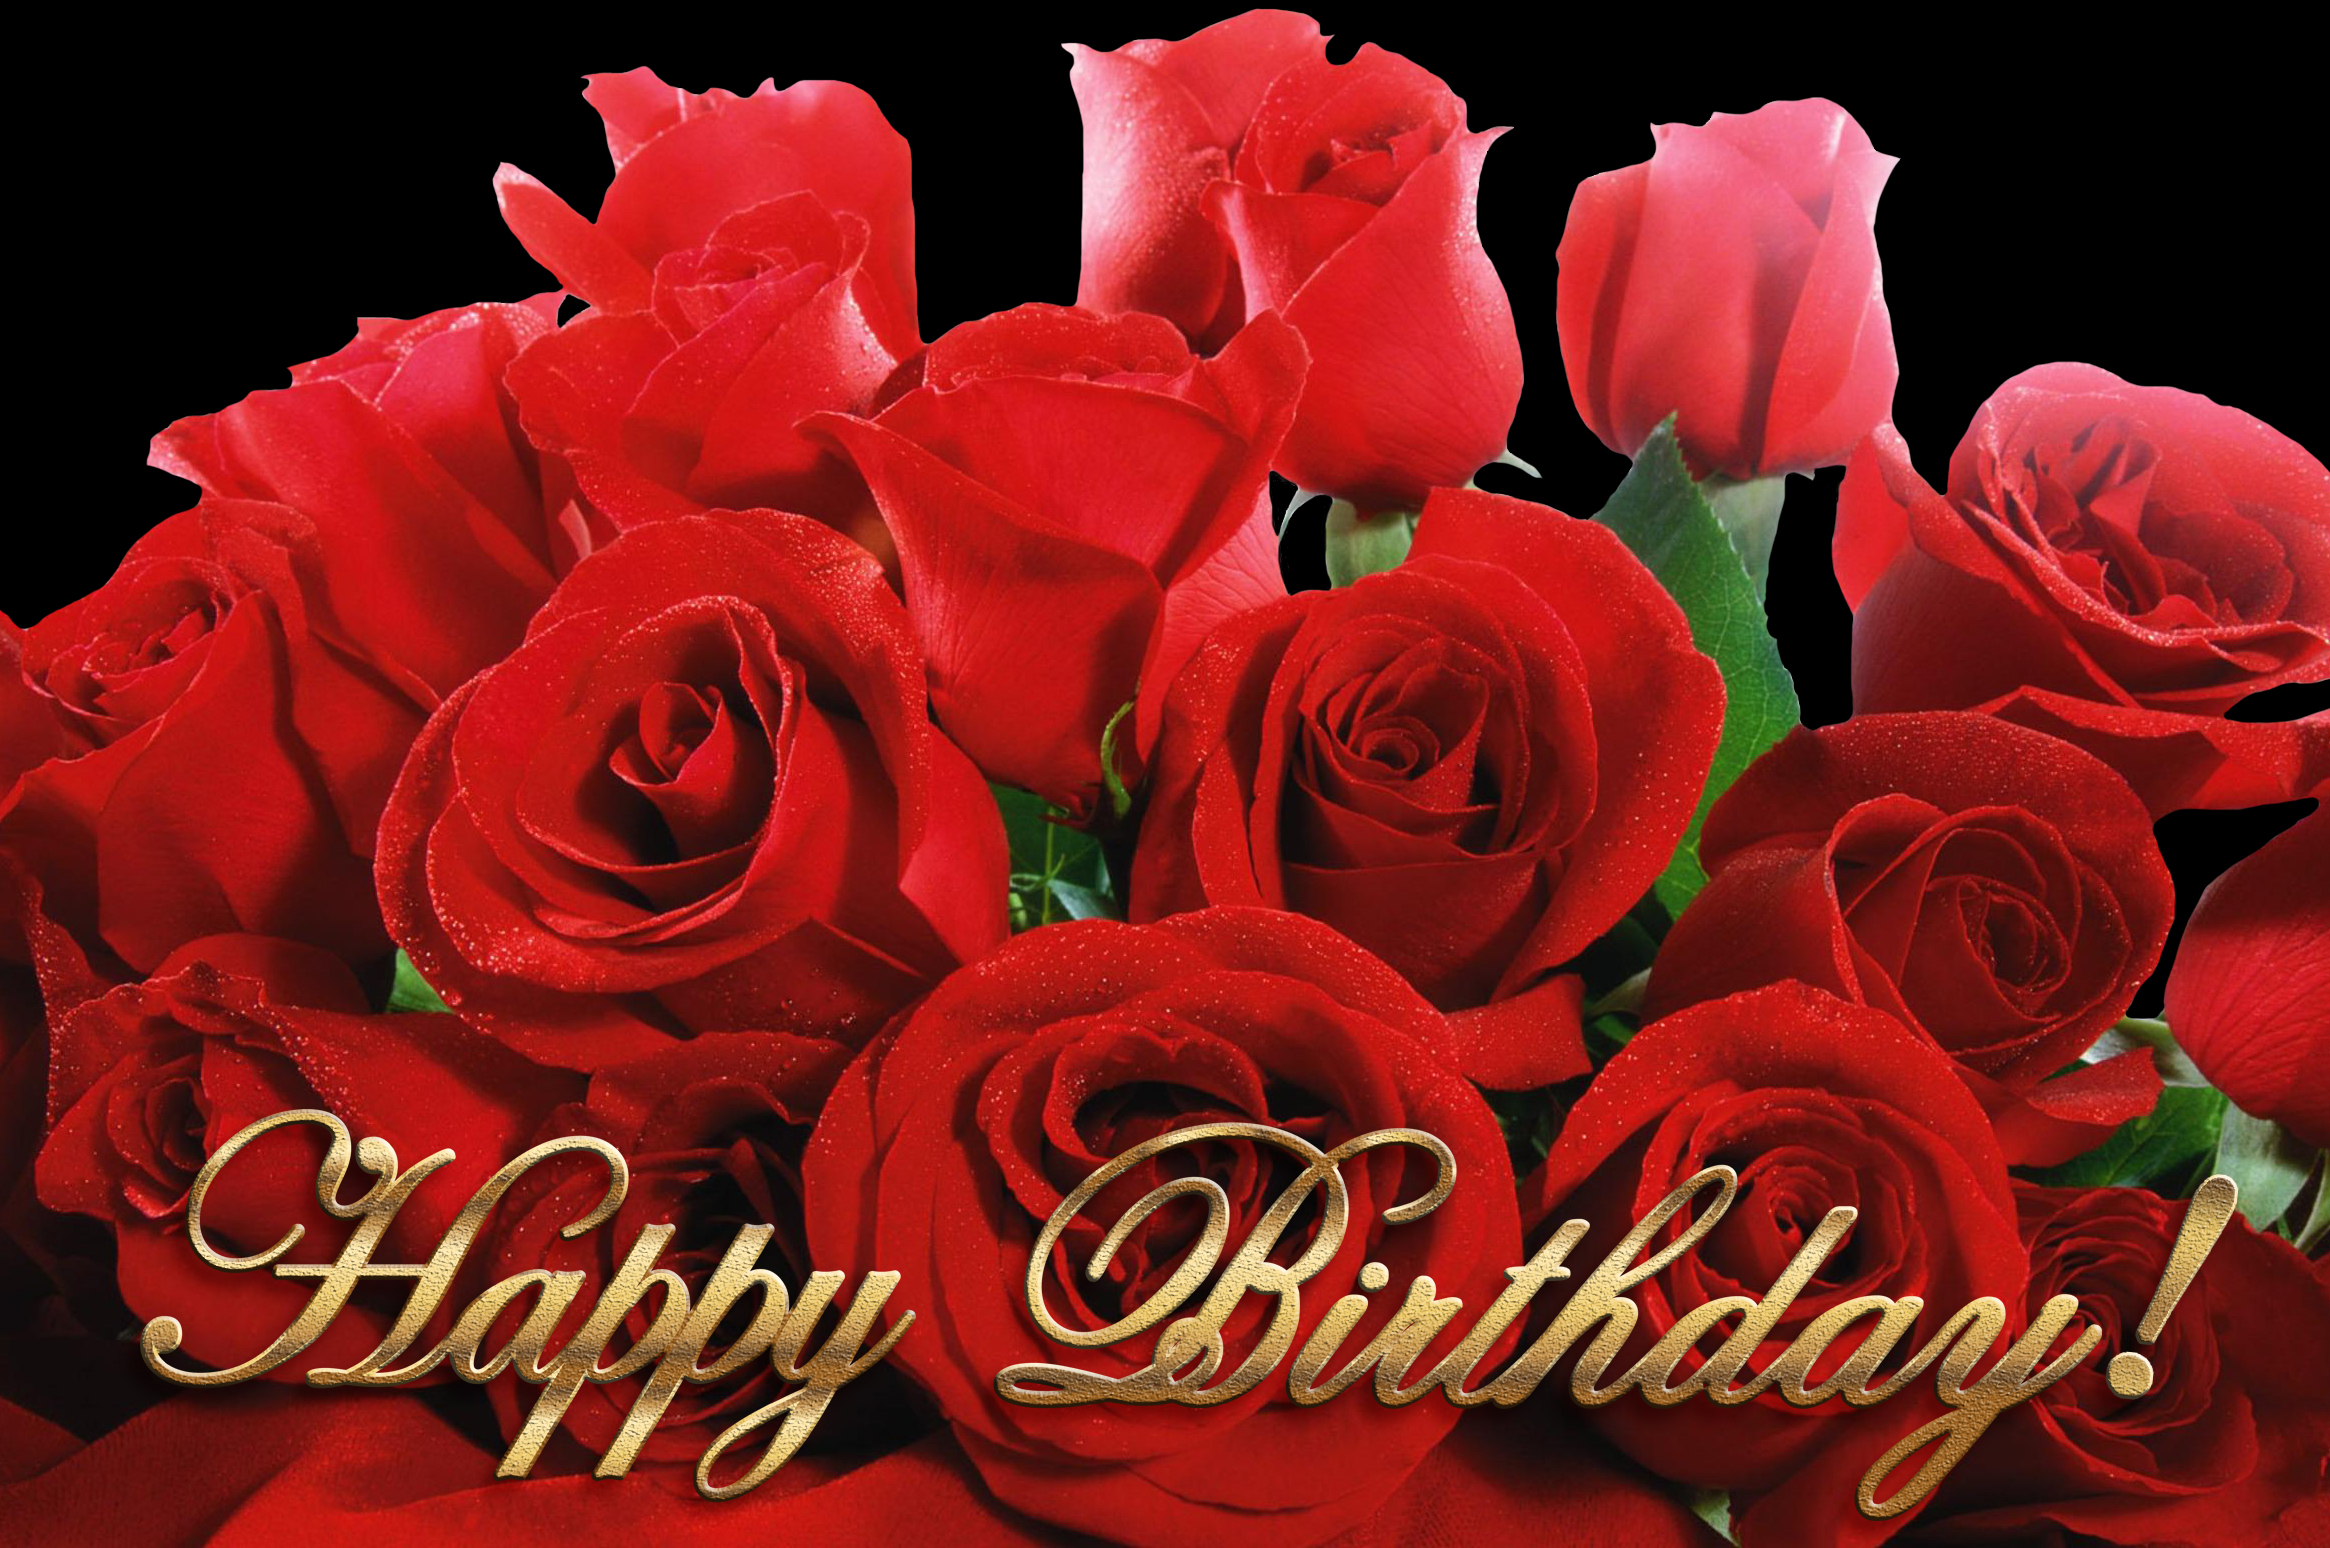 Happy Birthday Picture with Flowers Red Roses